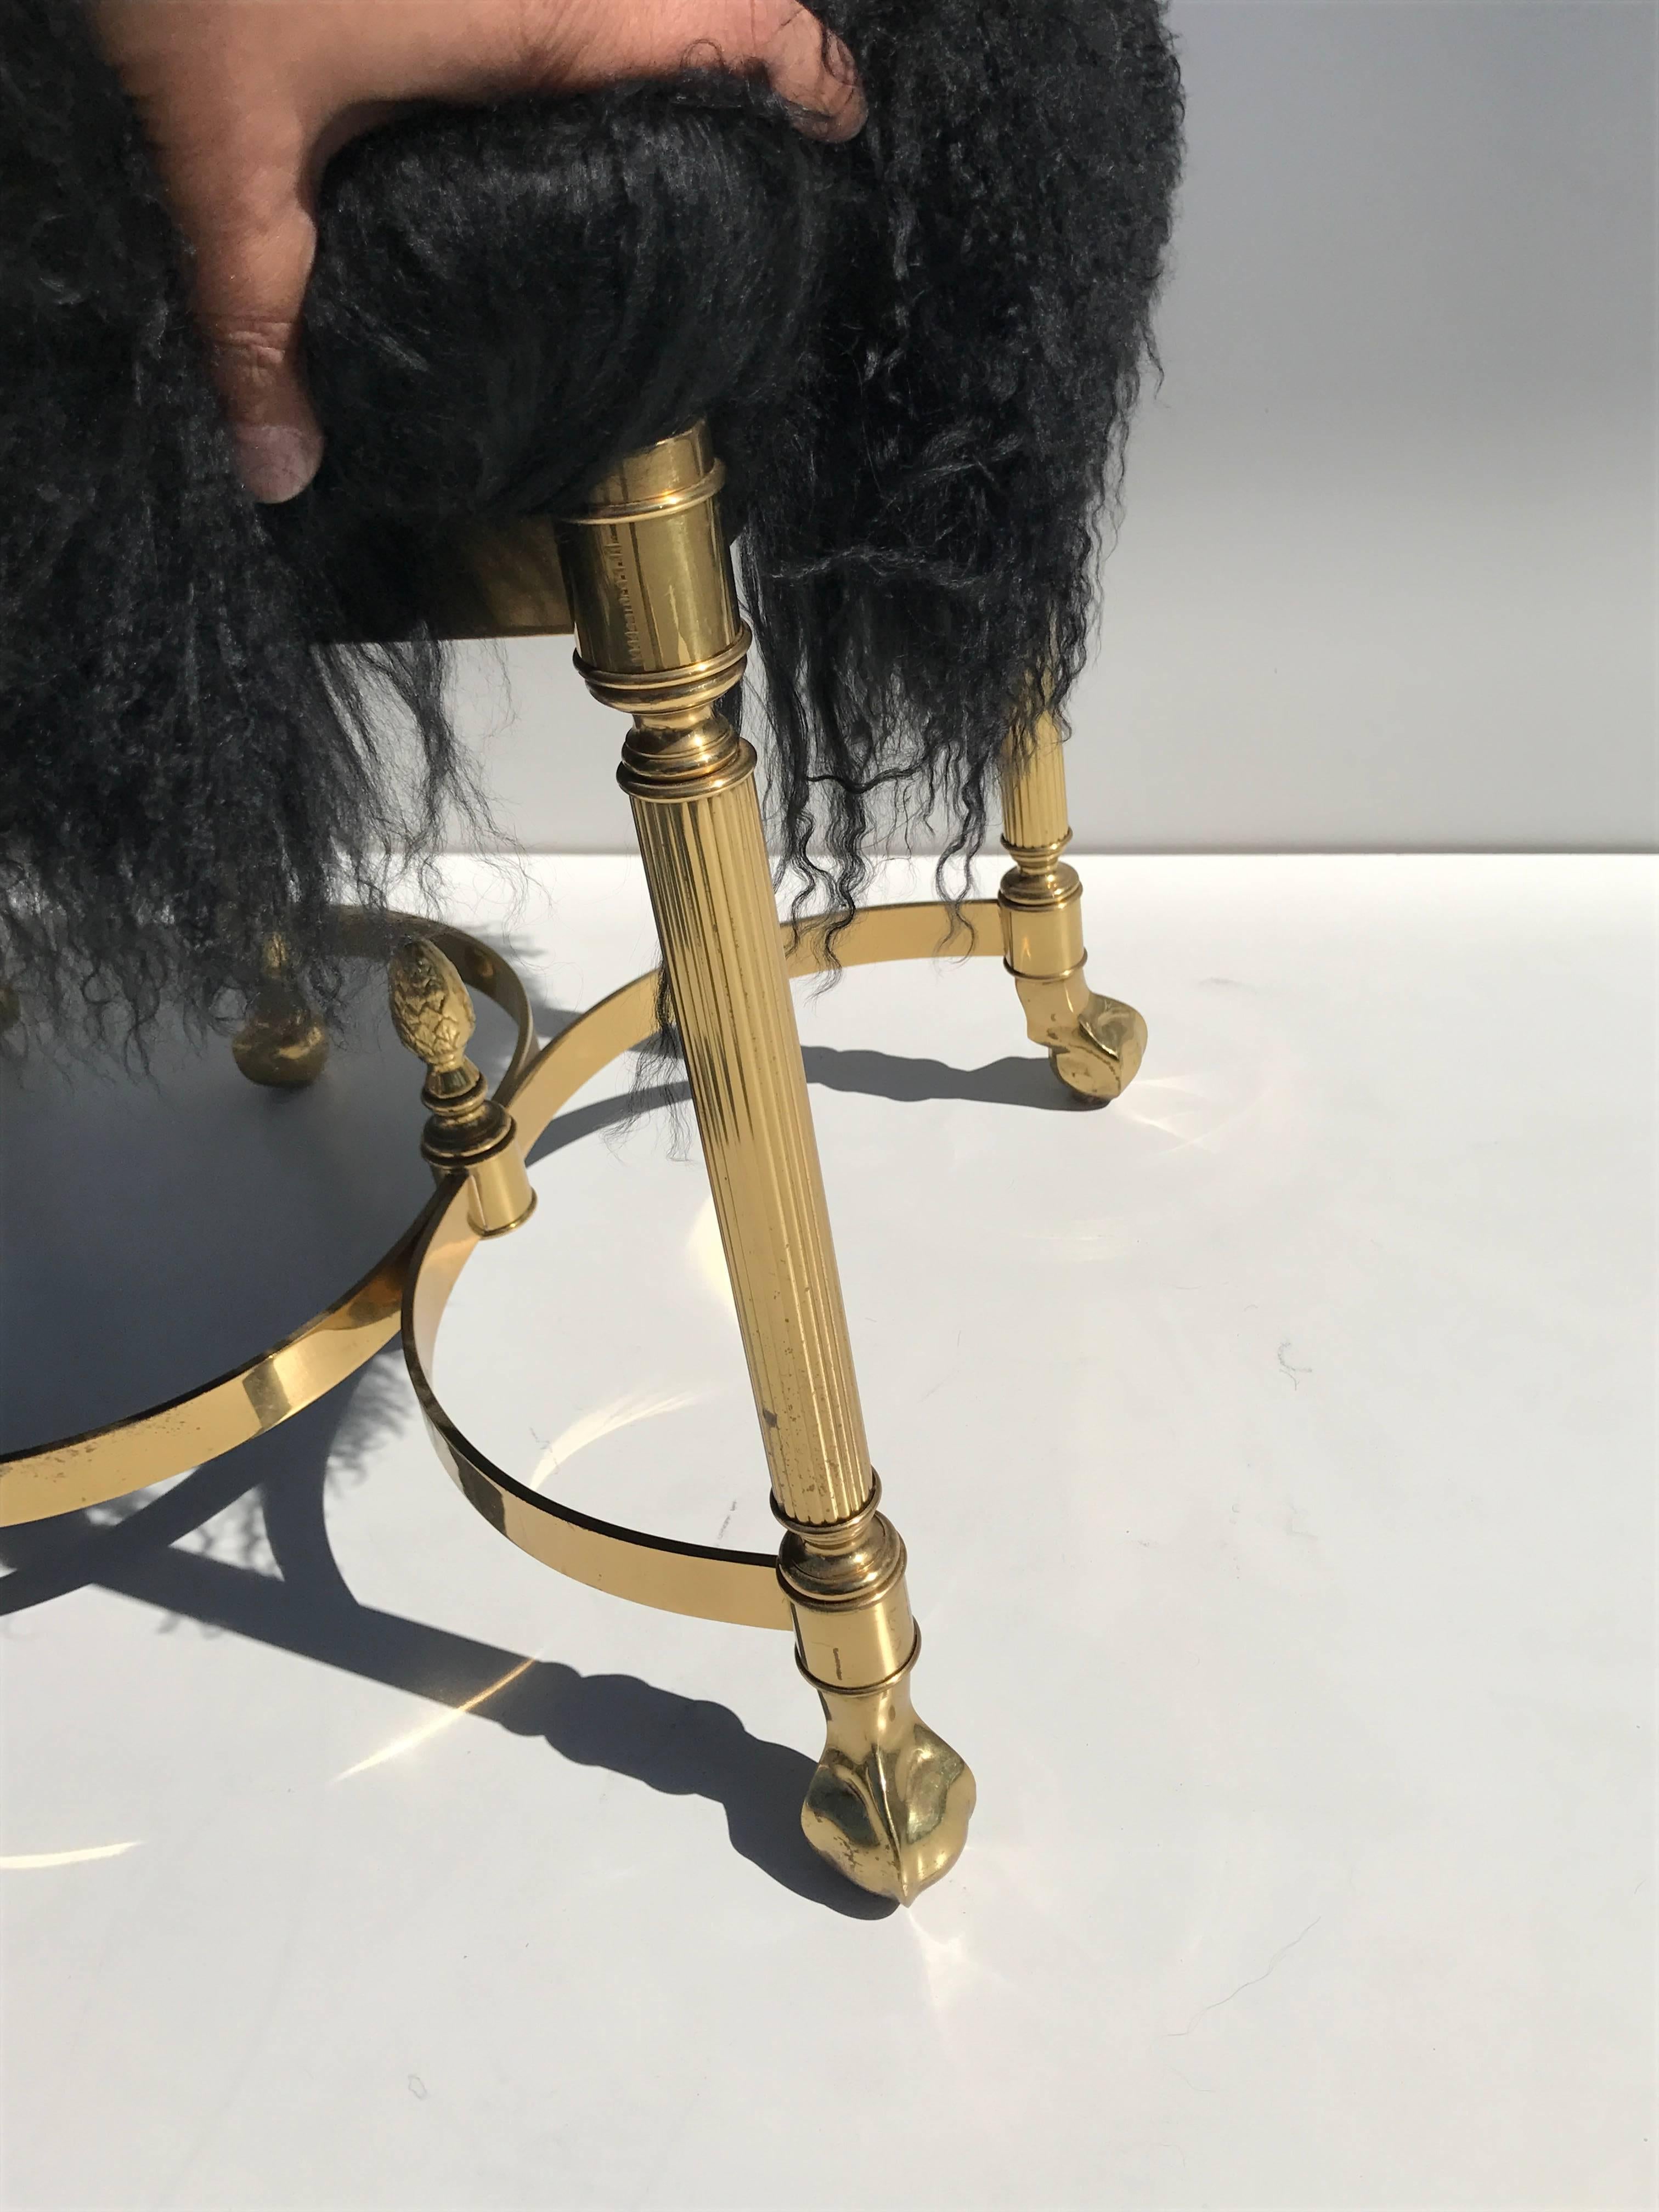 Petit Brass Footrest or Bench with Mongolian Wool In Excellent Condition For Sale In North Hollywood, CA